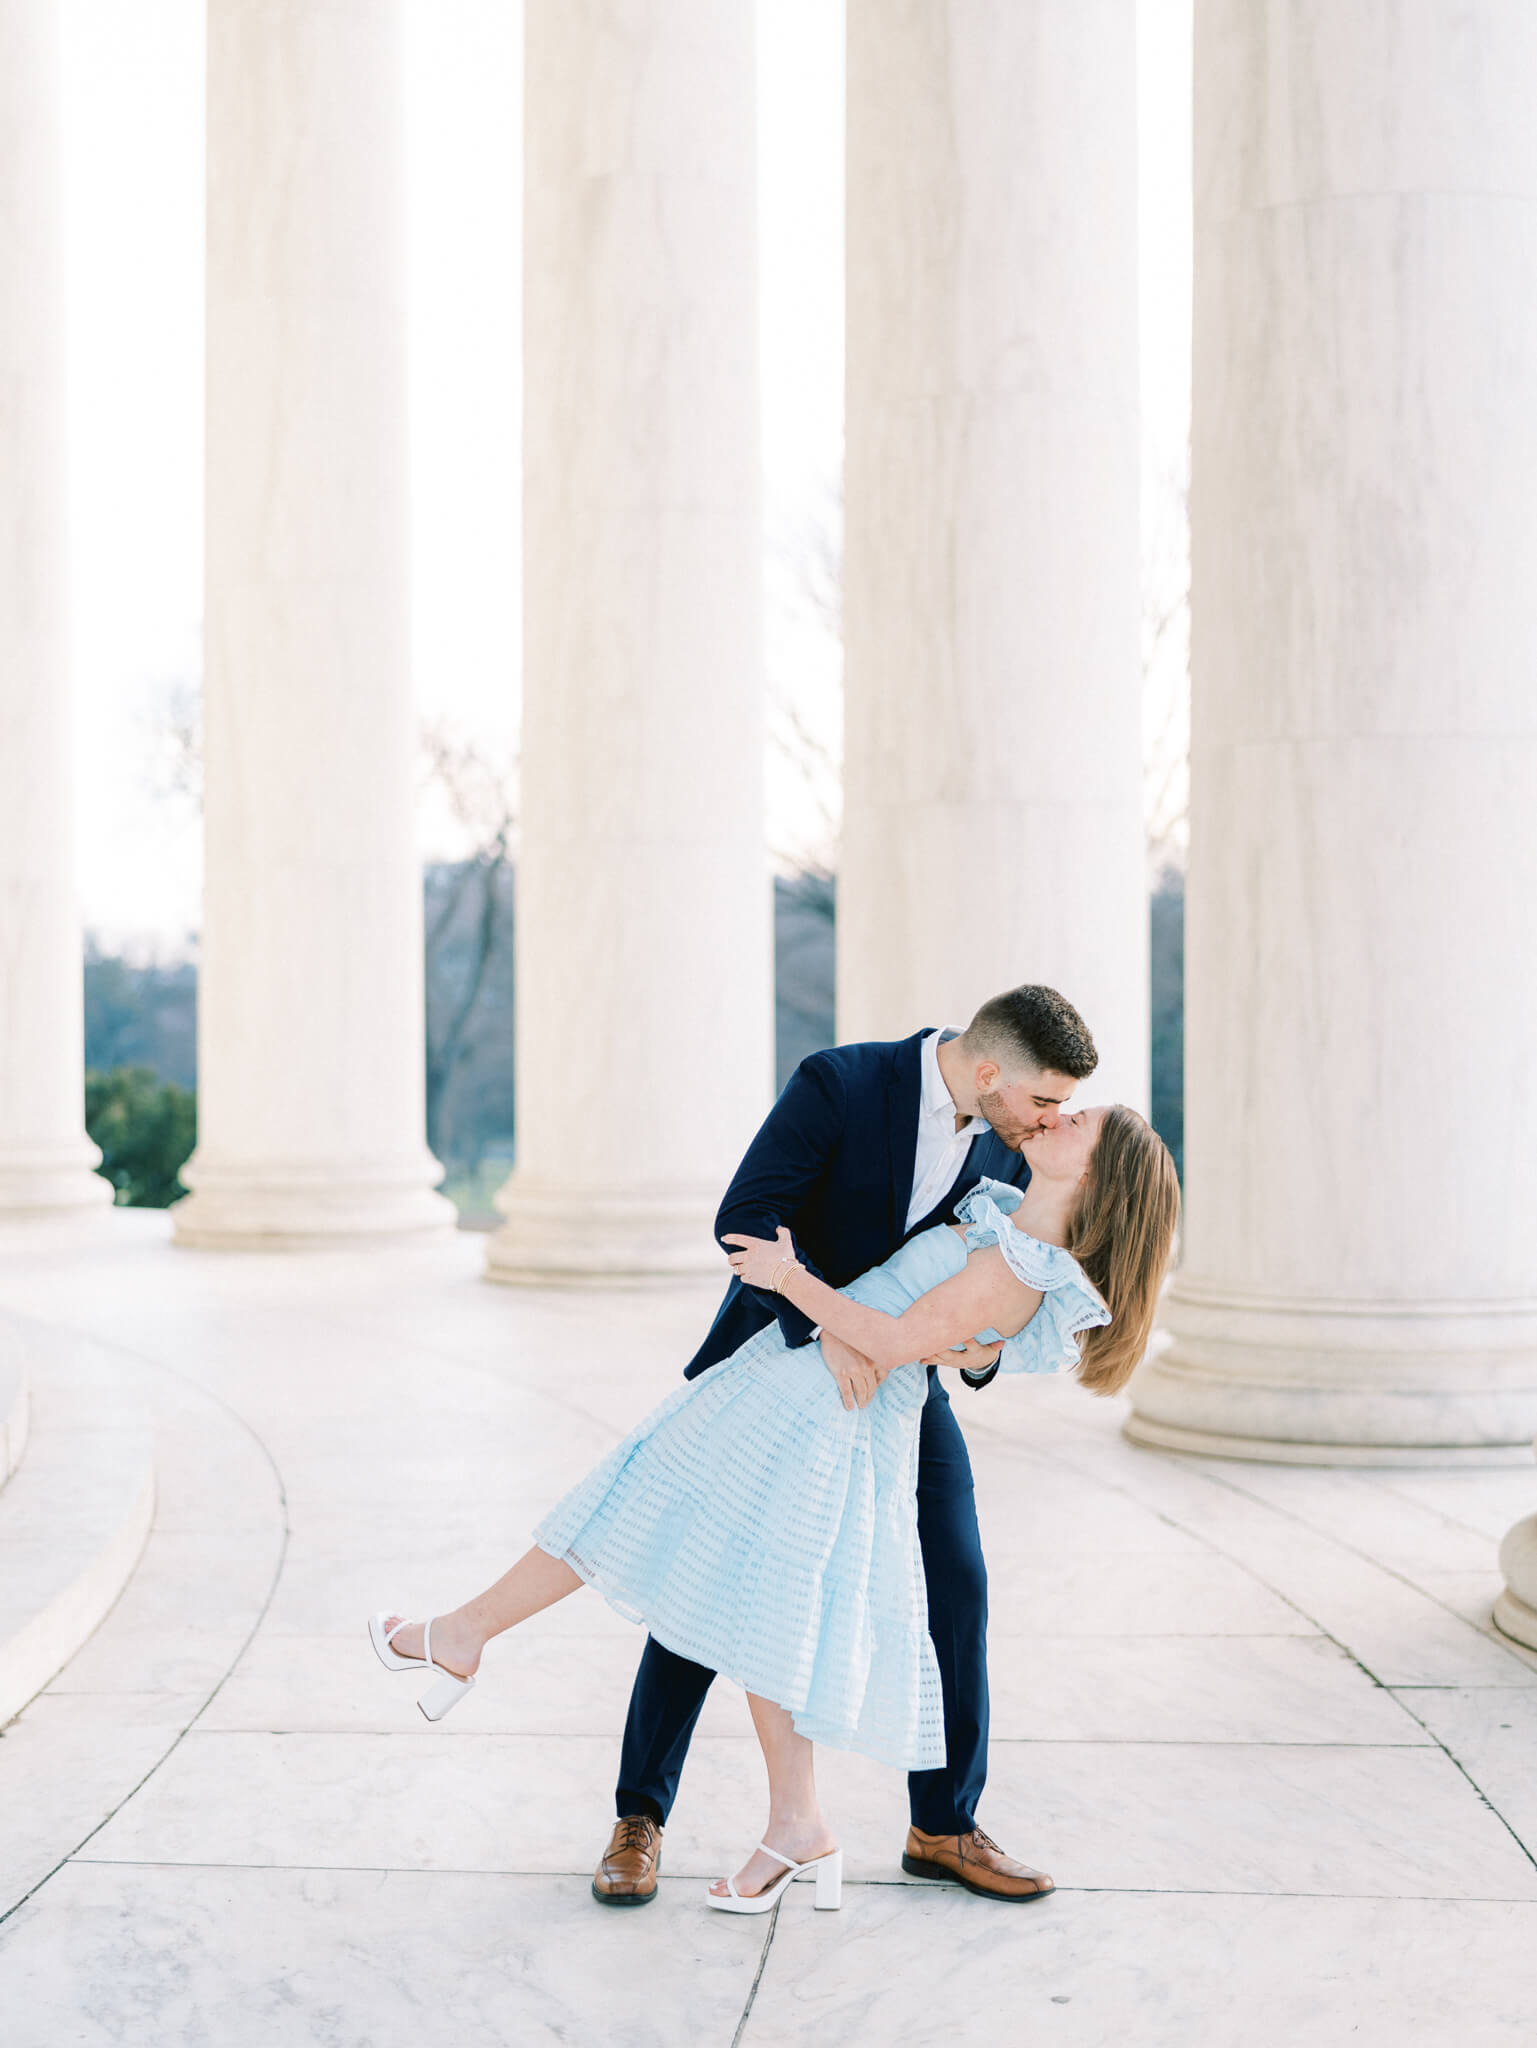 A man in a navy blue suit dipping back and kissing his fiancée wearing a light blue dress in front of the marble columns of the Jefferson Memorial.